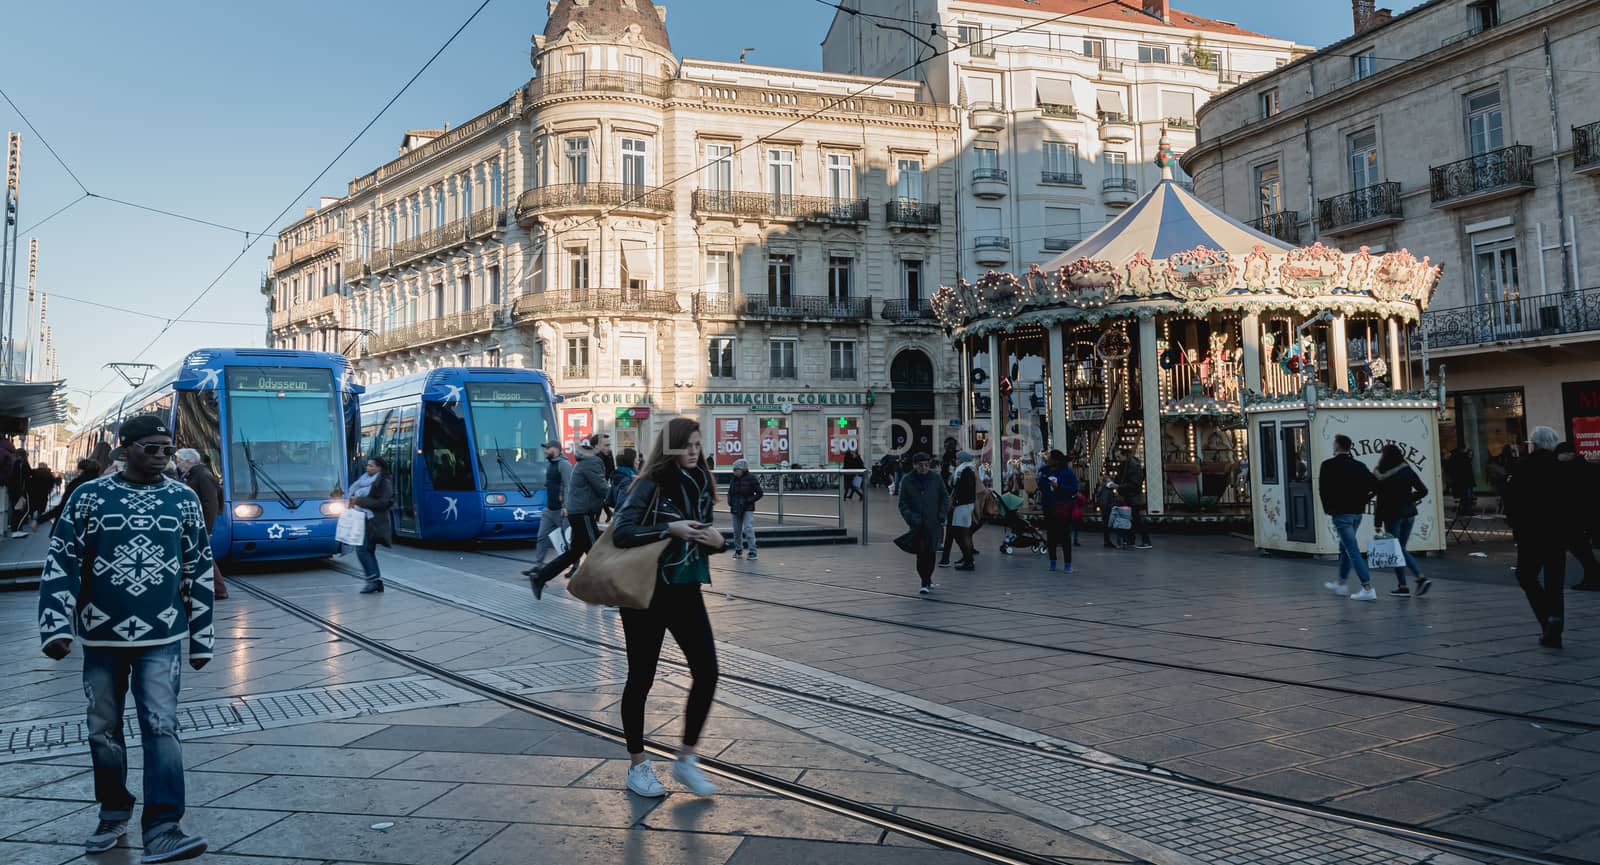 Electric tram stopped at Place de la Comedie in Montpellier by AtlanticEUROSTOXX